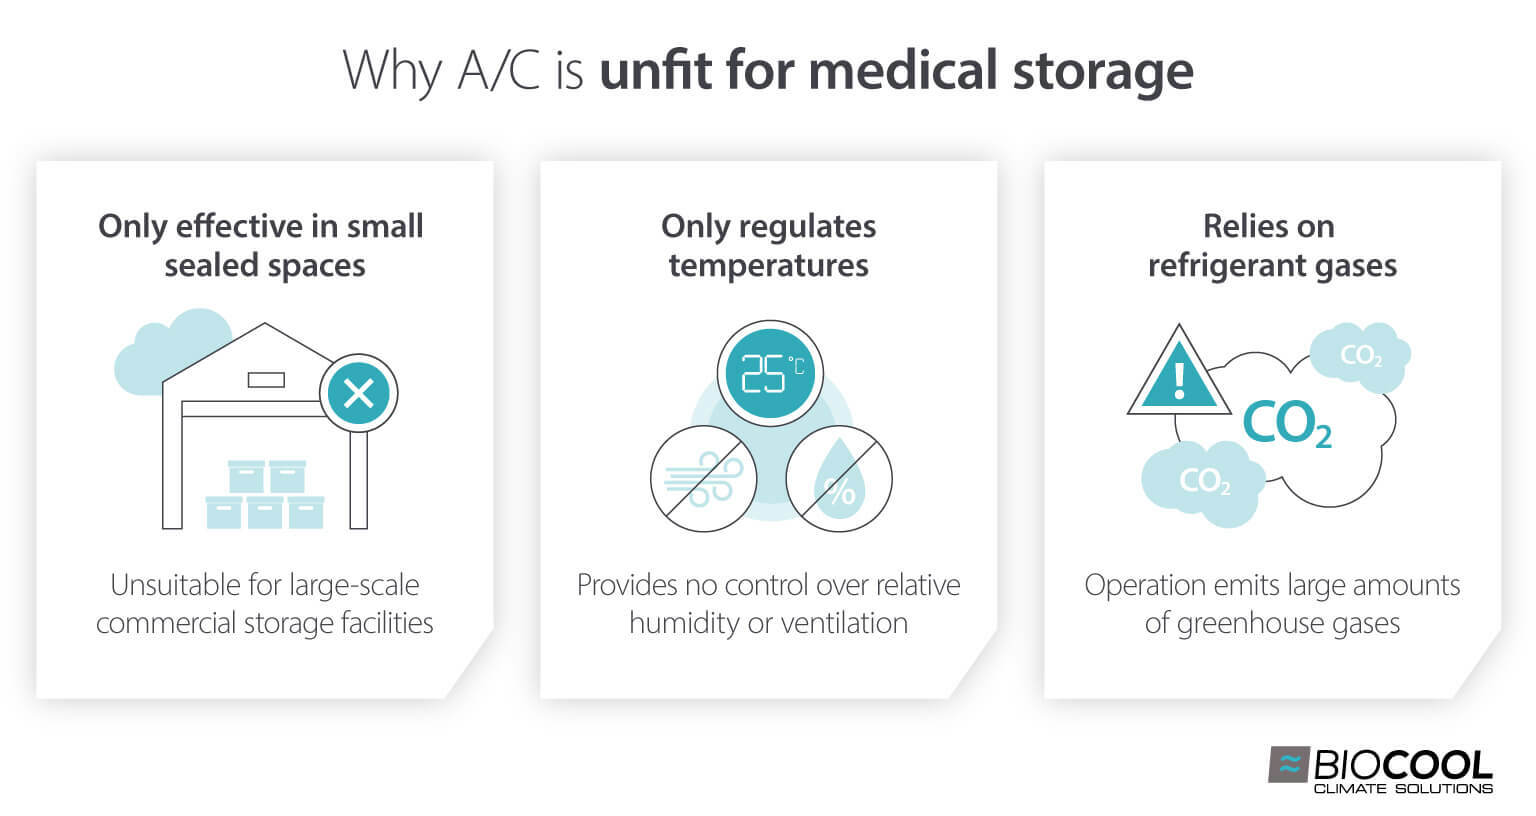 Why evaporative cooling is better than air conditioning for medical and pharmaceutical warehouses storage - infographic image